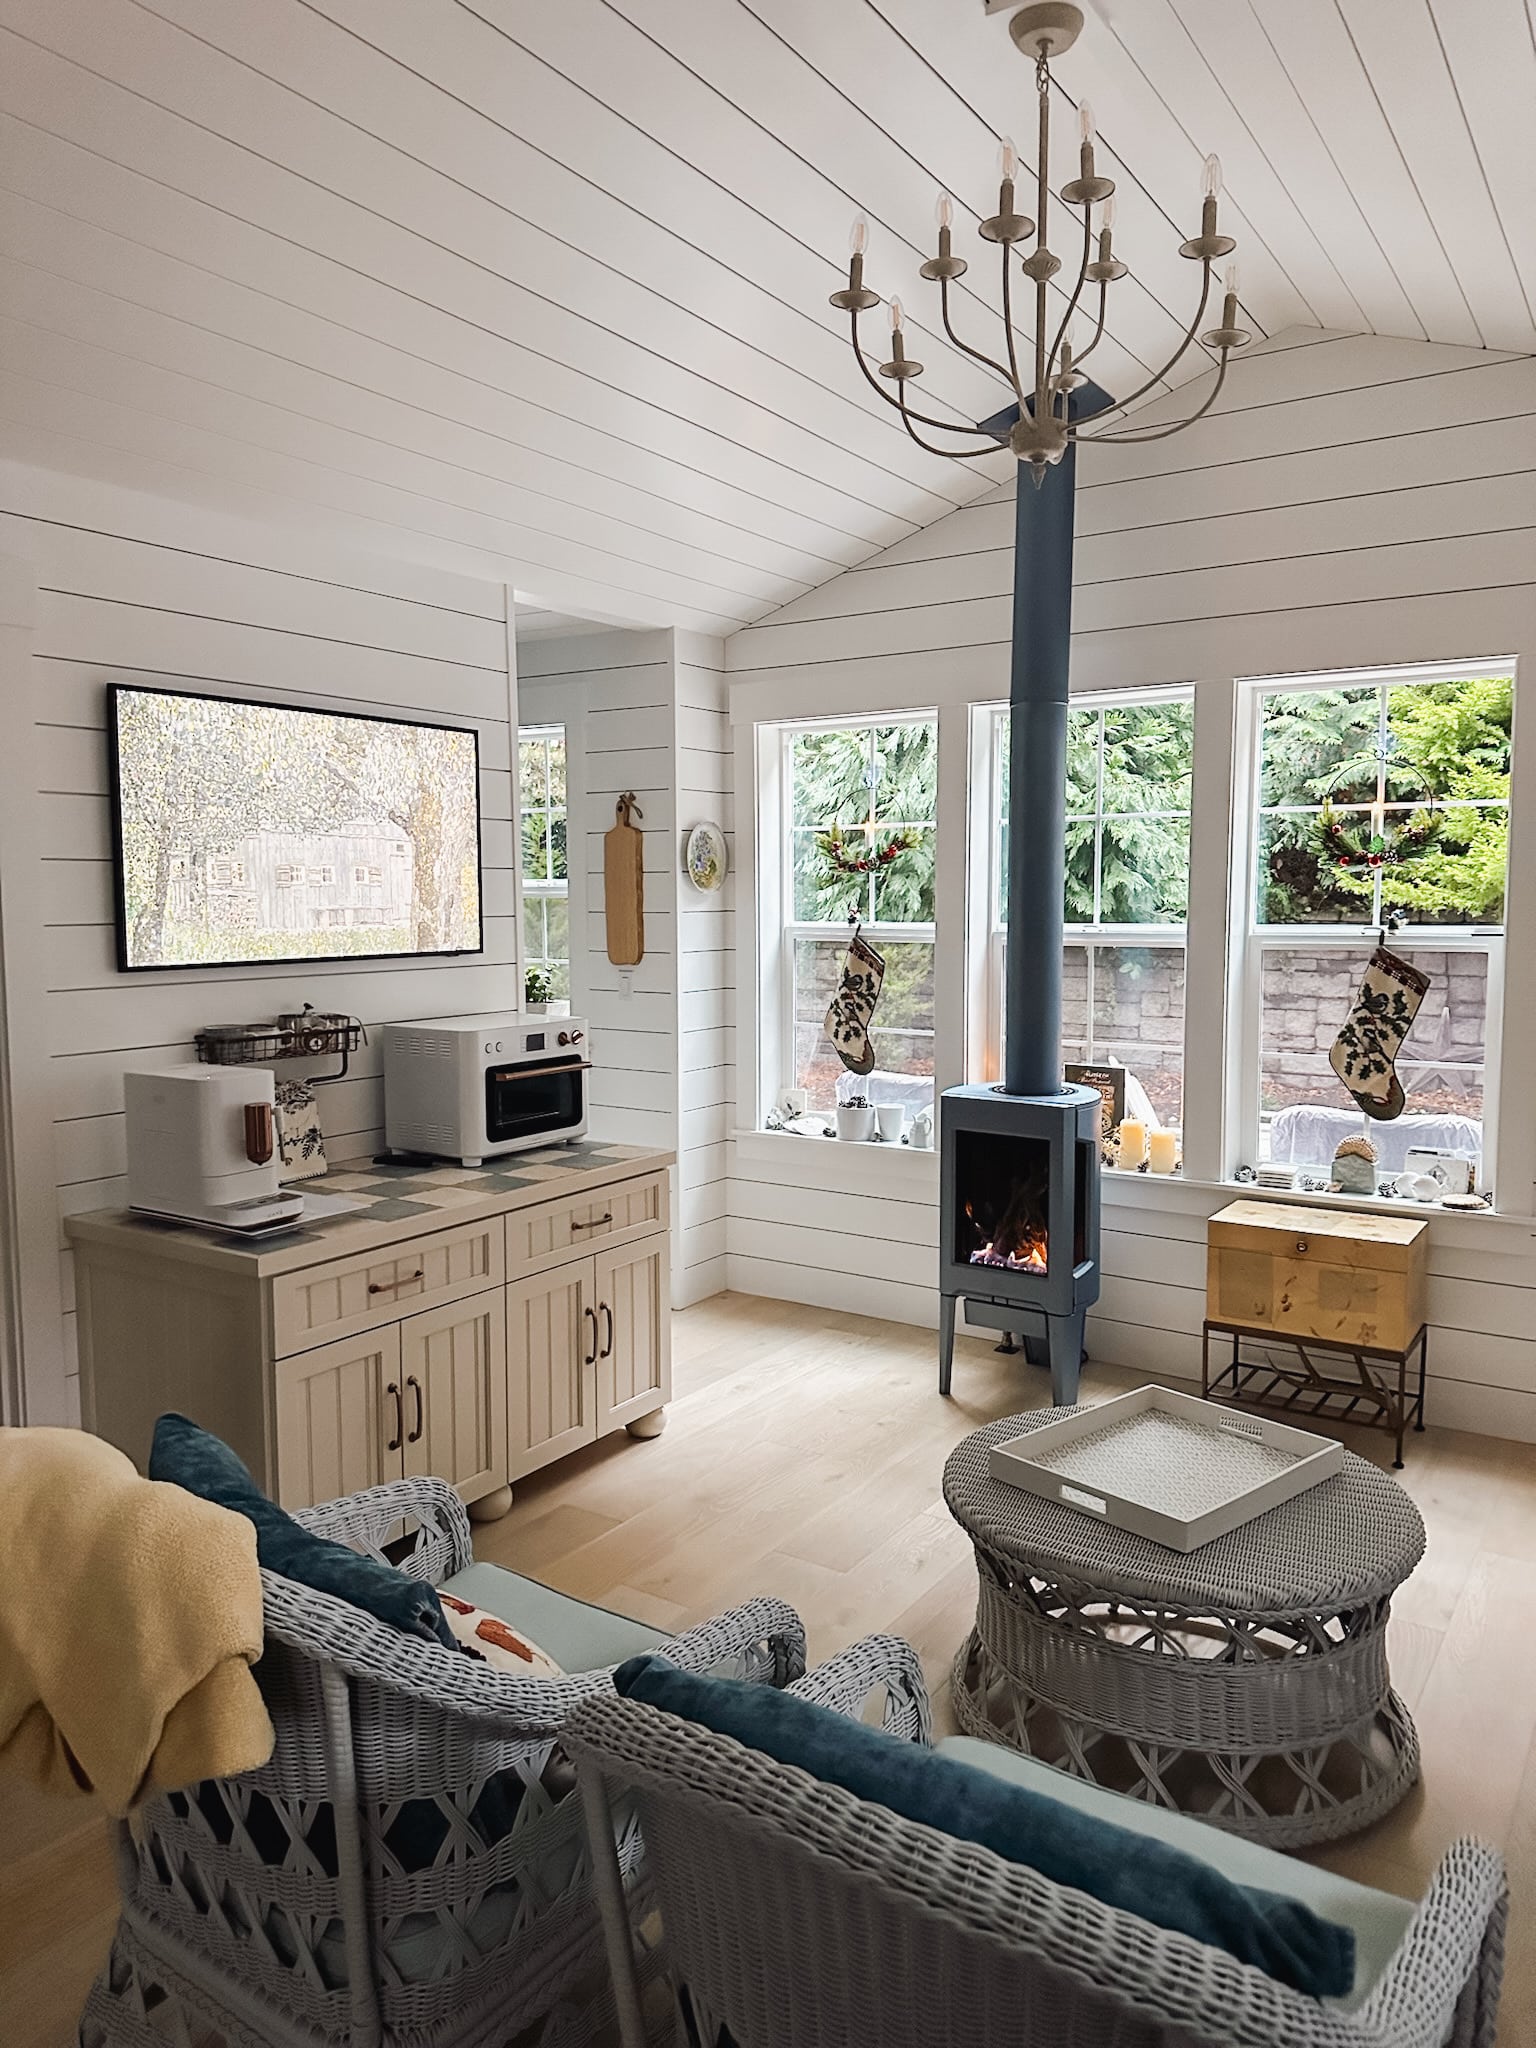 The 400 Square Foot Tiny Cottage Tour at Christmas!